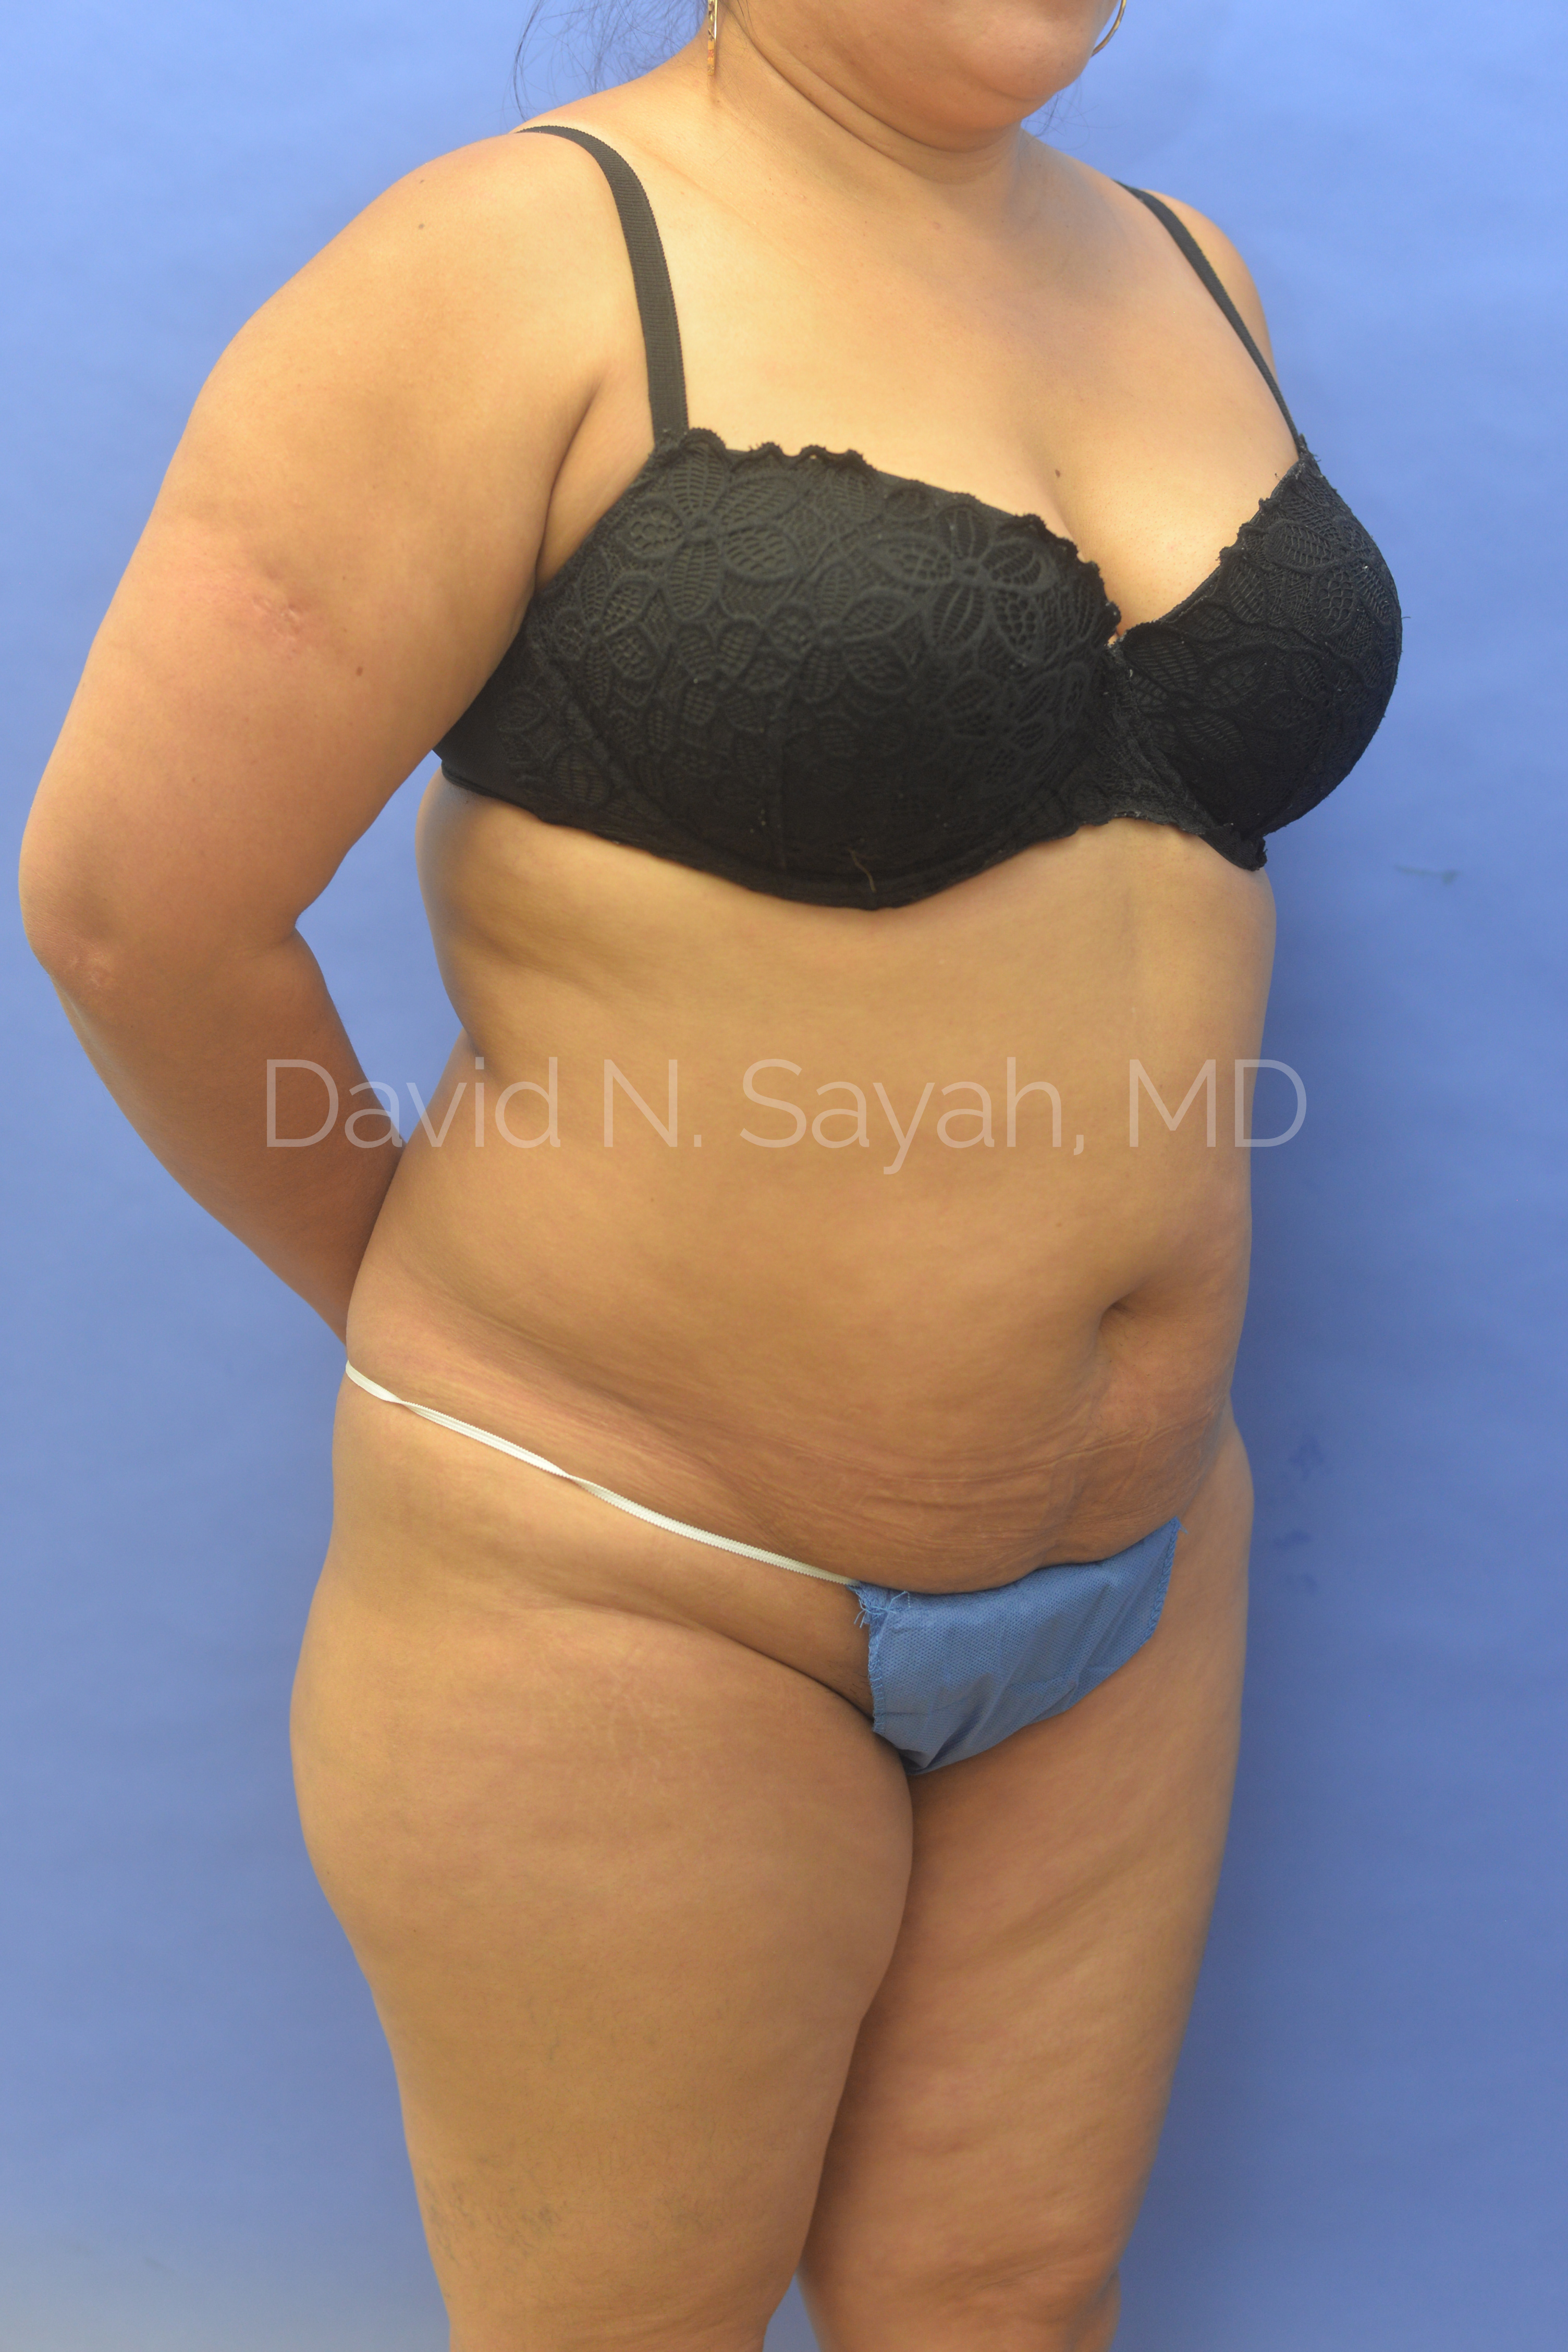 Tummy Tuck Before and After | Sayah Institute